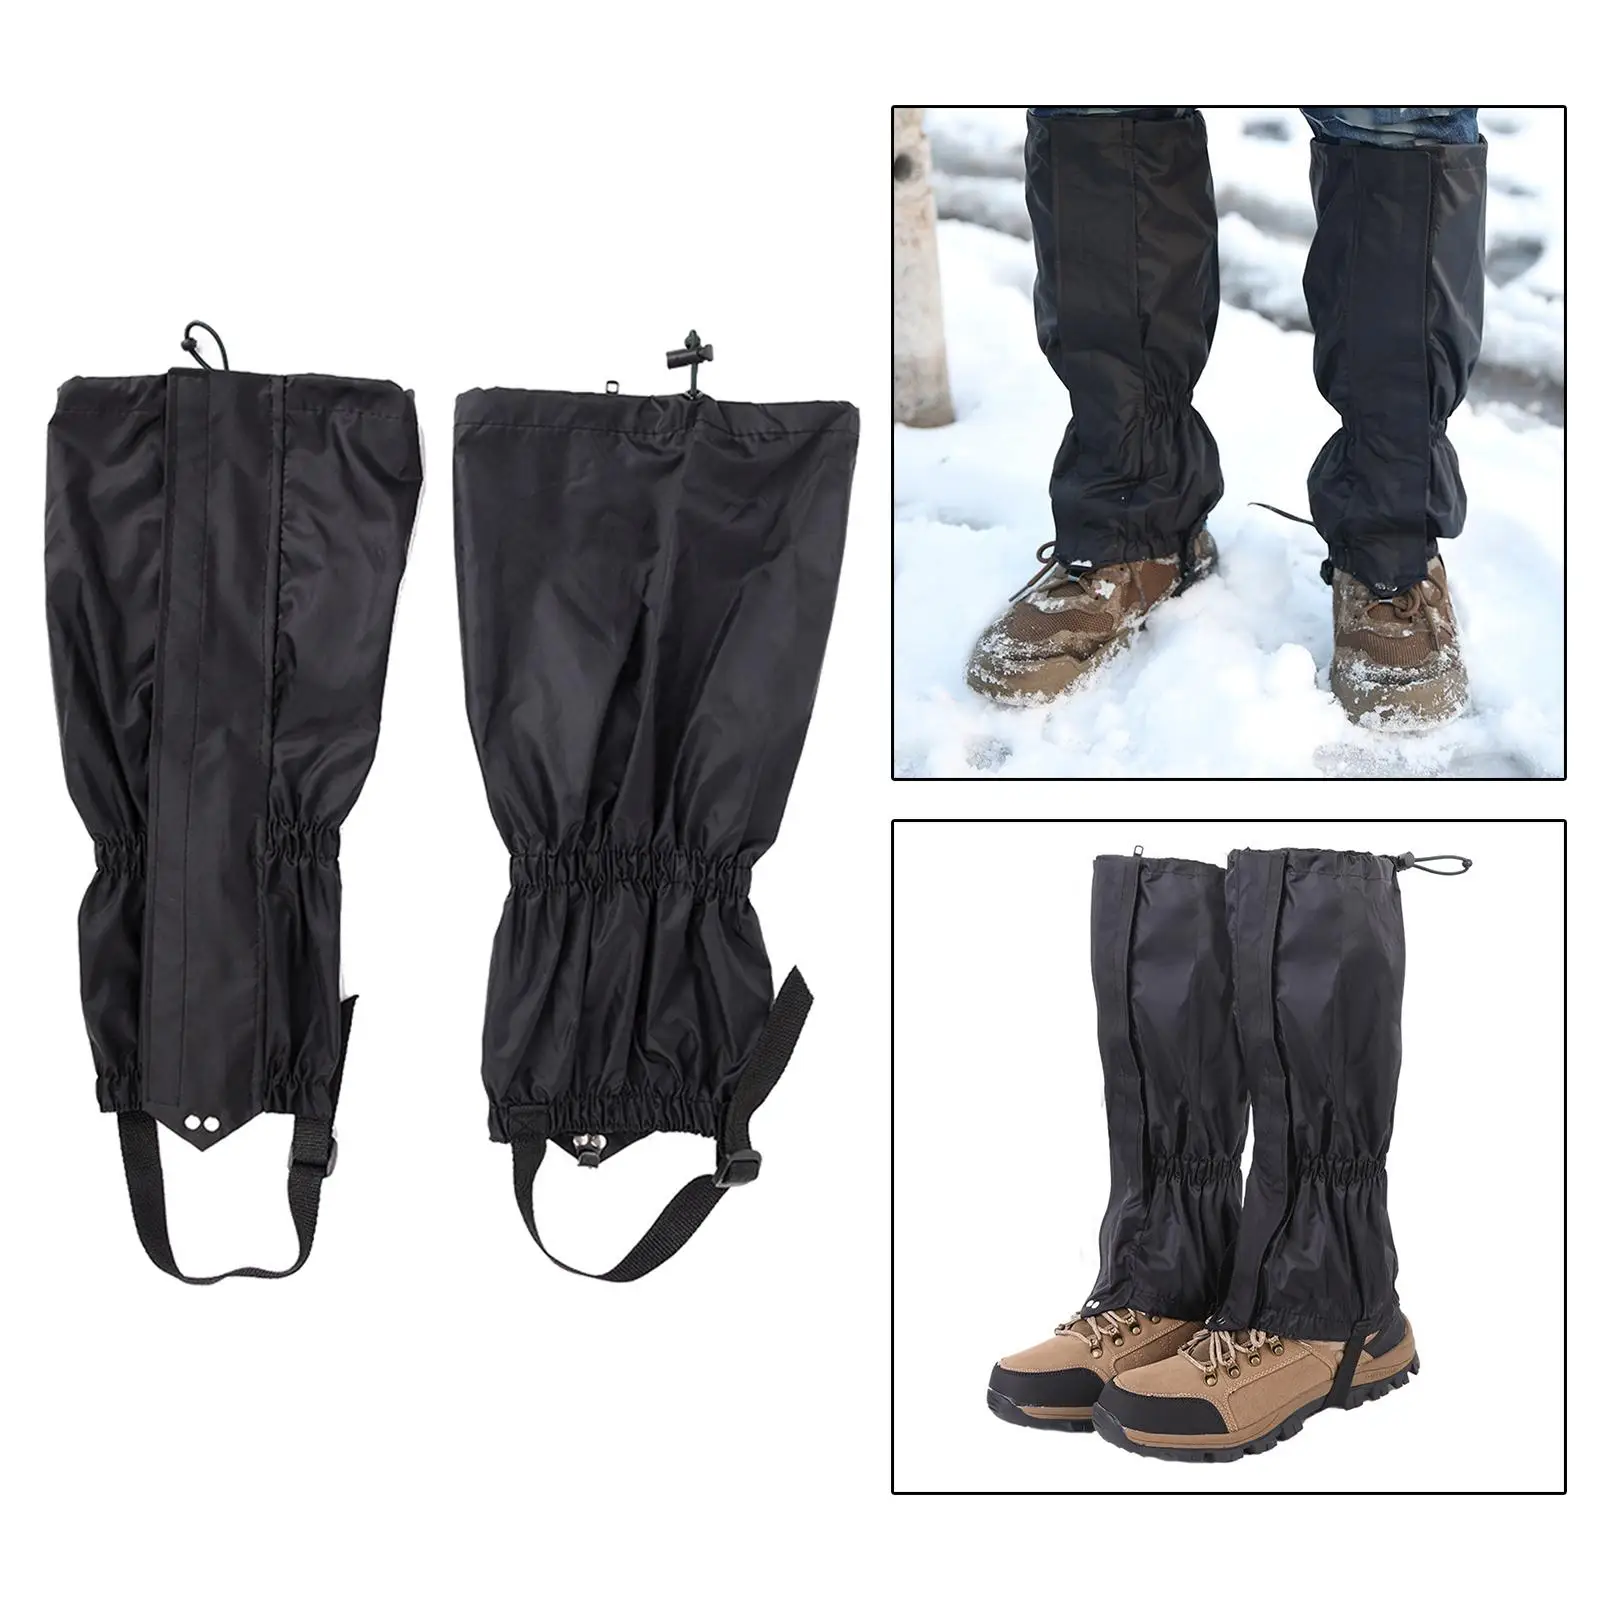 Leg    Shoes Covers Adjustable Legging Guard for Outdoor Walking Unisex